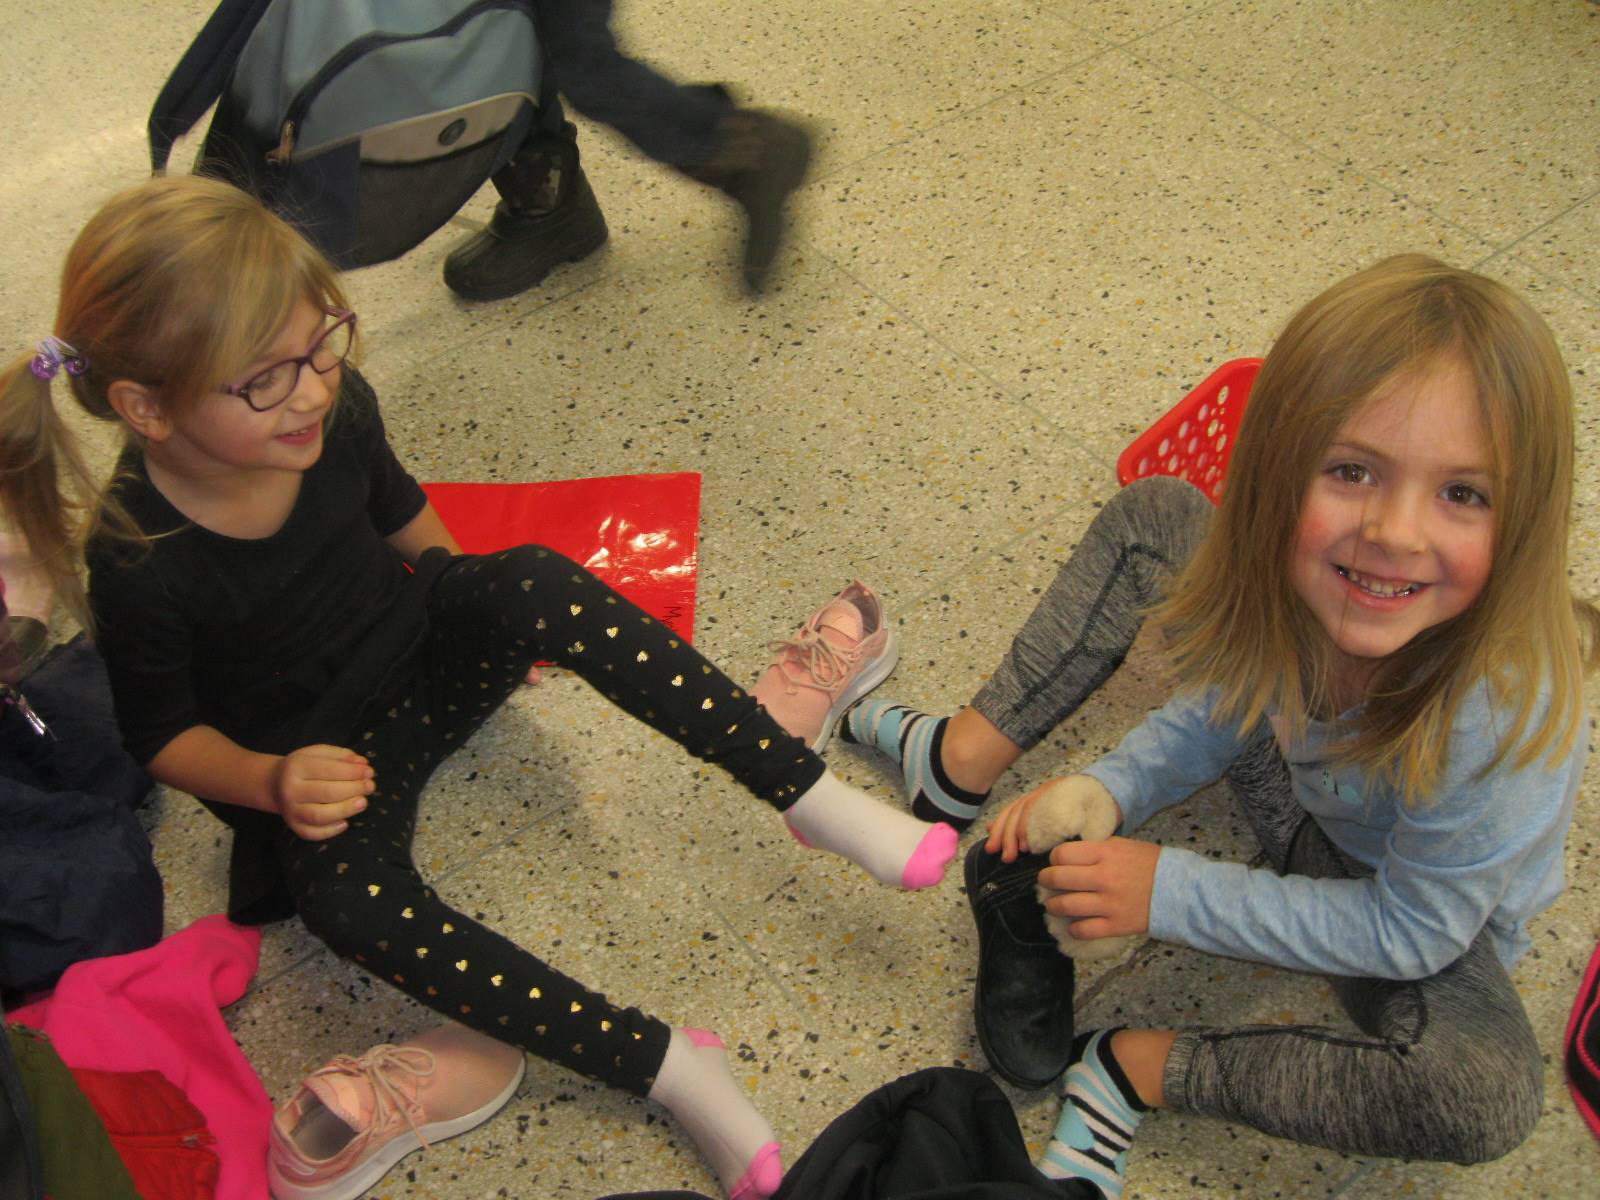 A student helps tie another student's shoes.